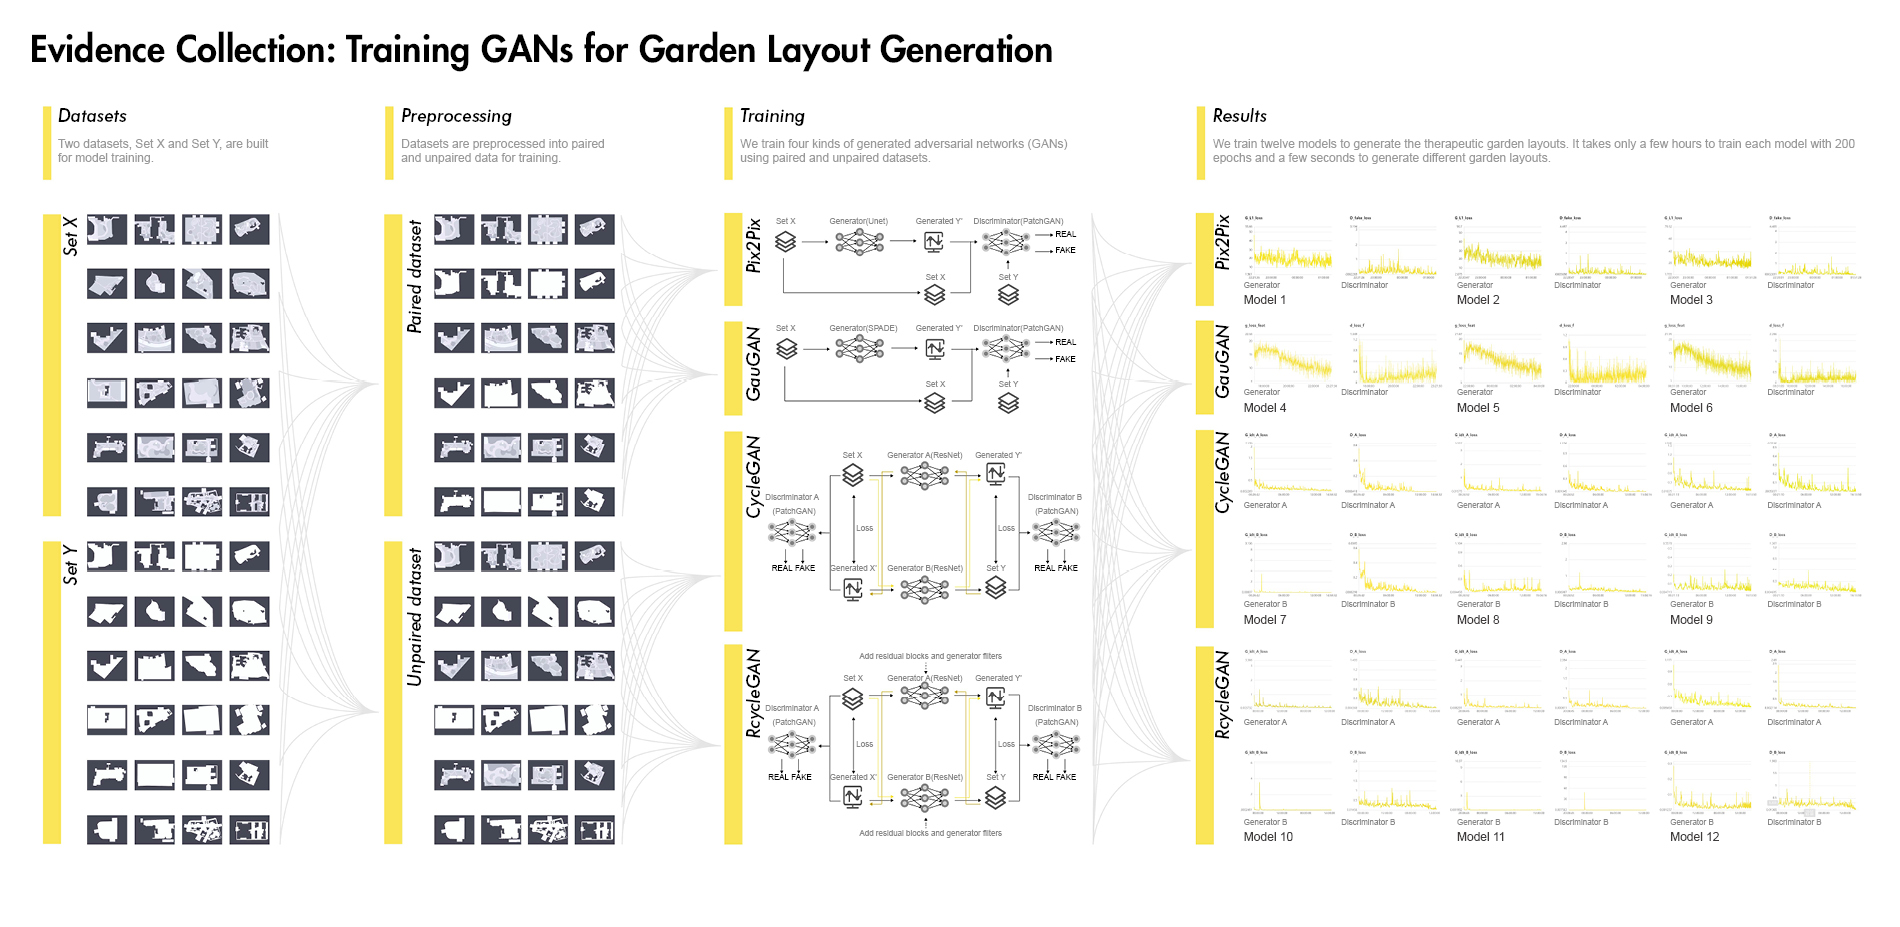 Evidence Collection: Training GANs for Garden Layout Generation